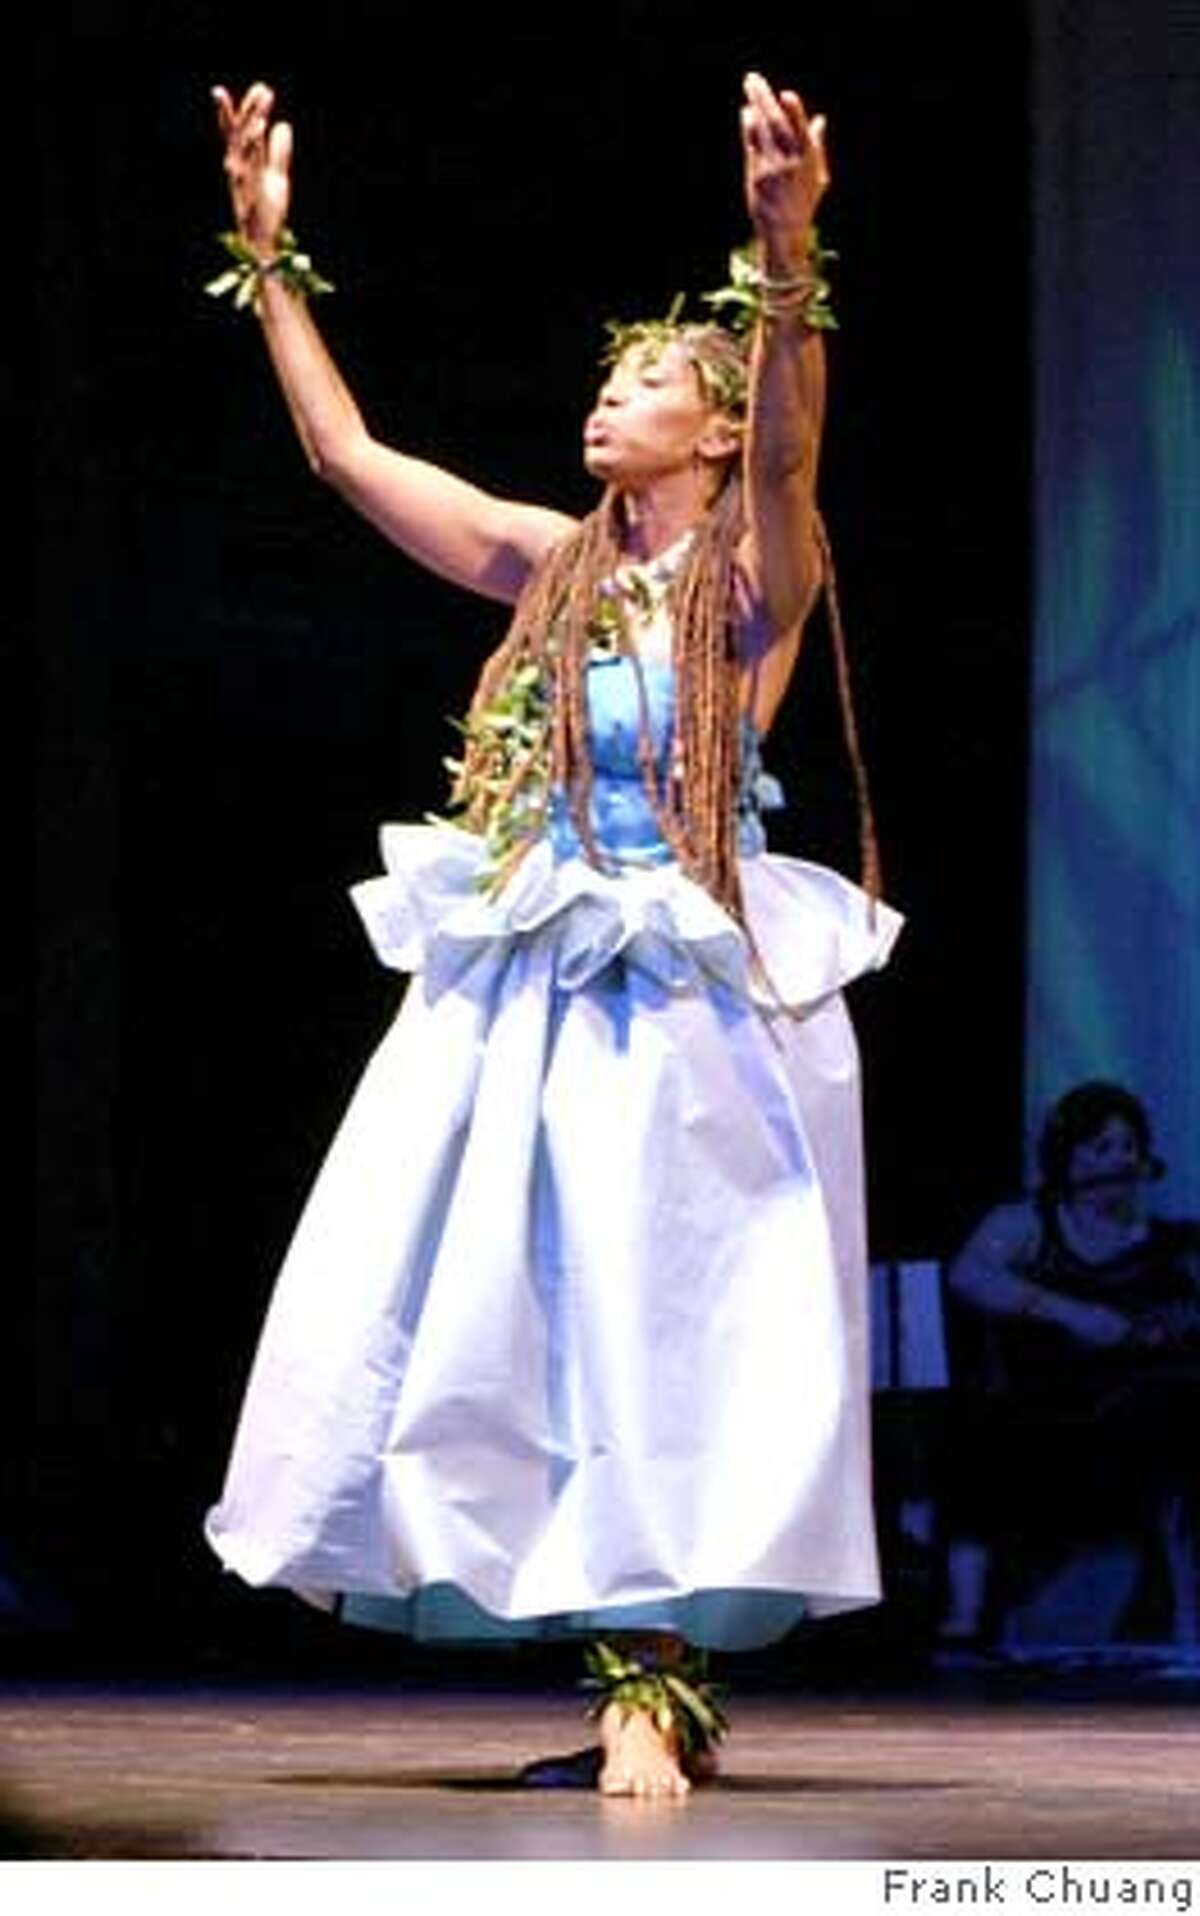 HAWAII CALLS -- Mahealani Uchiyama, director of KaUaTahine dance troupe and the Center for International Dance in Berkeley, will celebrate her 50th birthday with a special performance of "A Walk by the Sea" Dec. 8, 2007, at Holy Name University in Oakland. She also has a CD out of the same name. Note: She also goes by her nickname, Mahea Uchiyama. Ran on: 12-02-2007